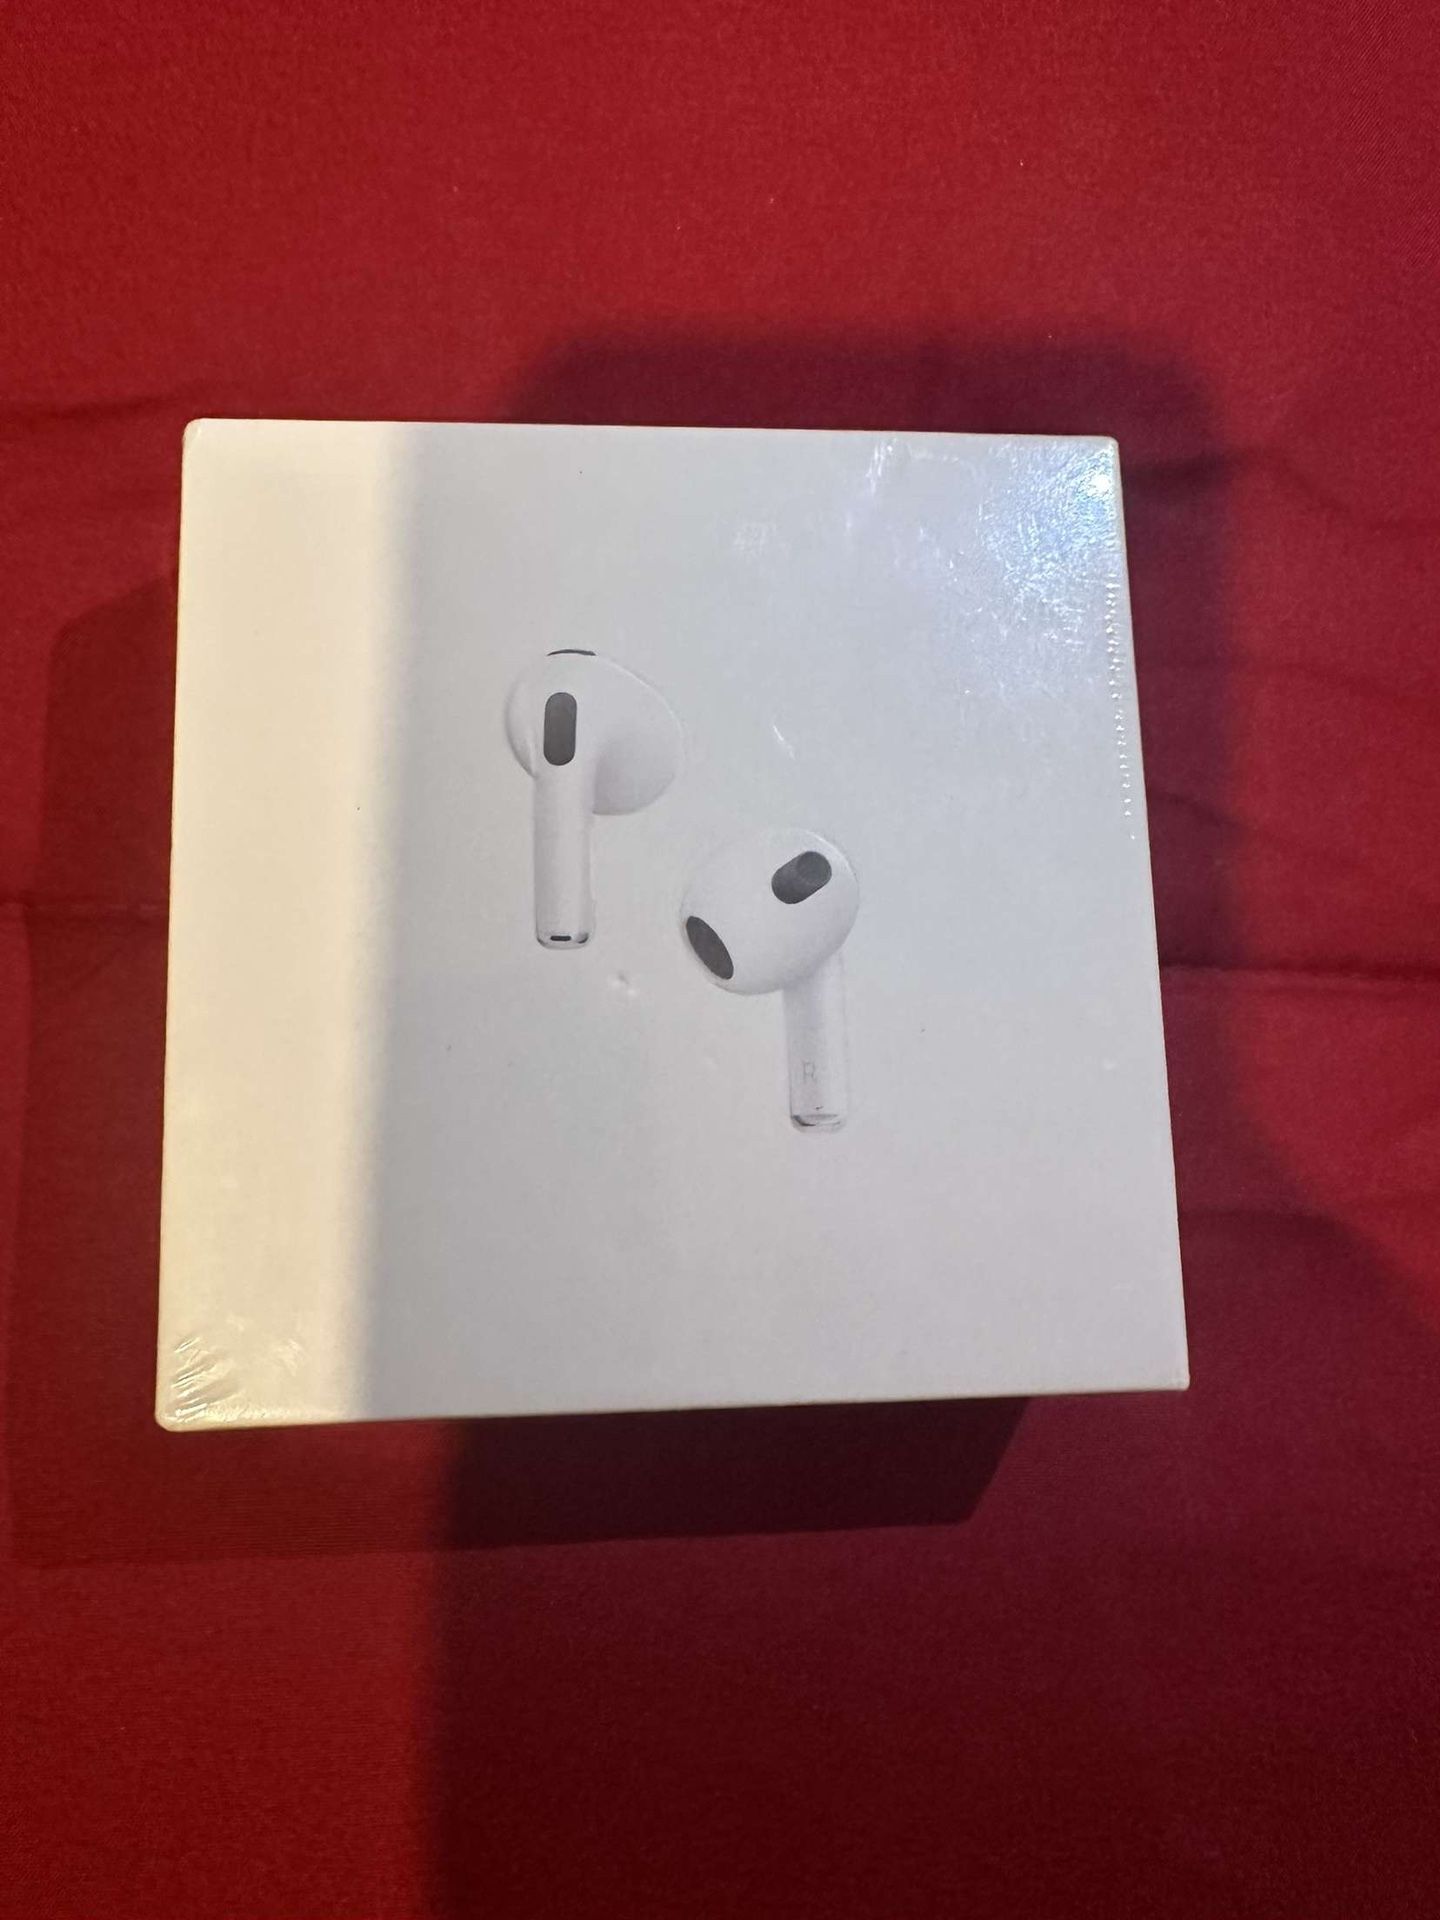 AirPods ( 3rd Generation) Brand New